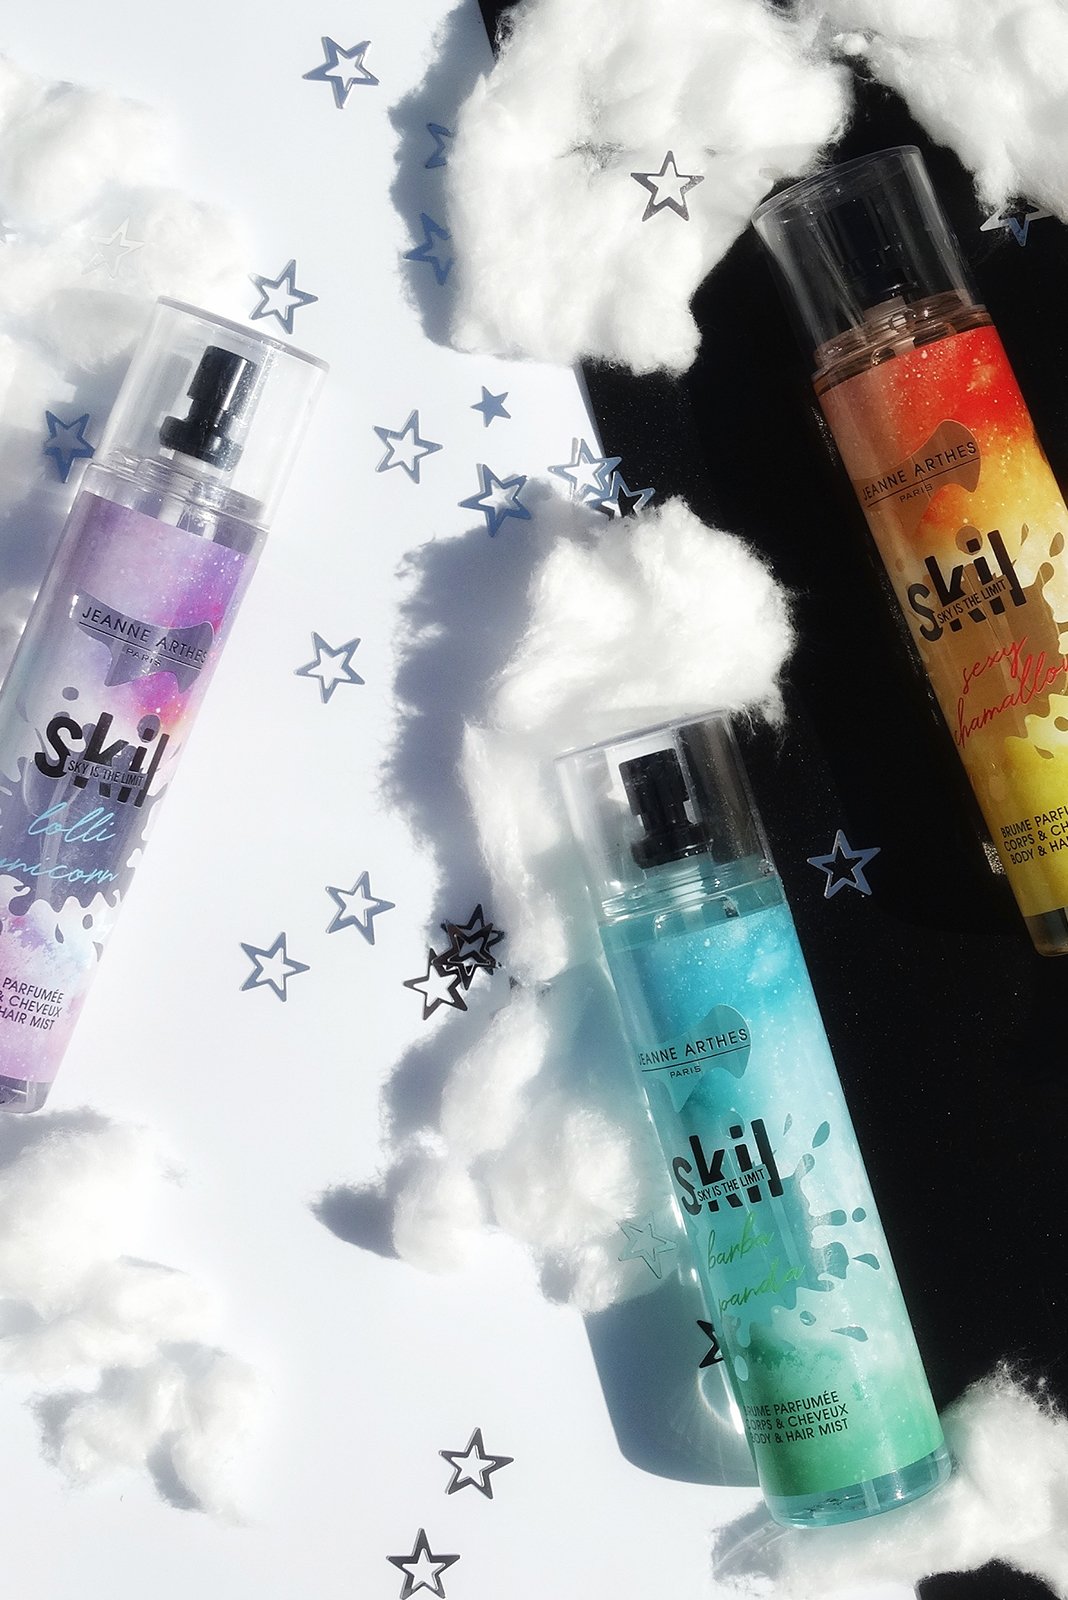 Skil composition parfums Milky Way